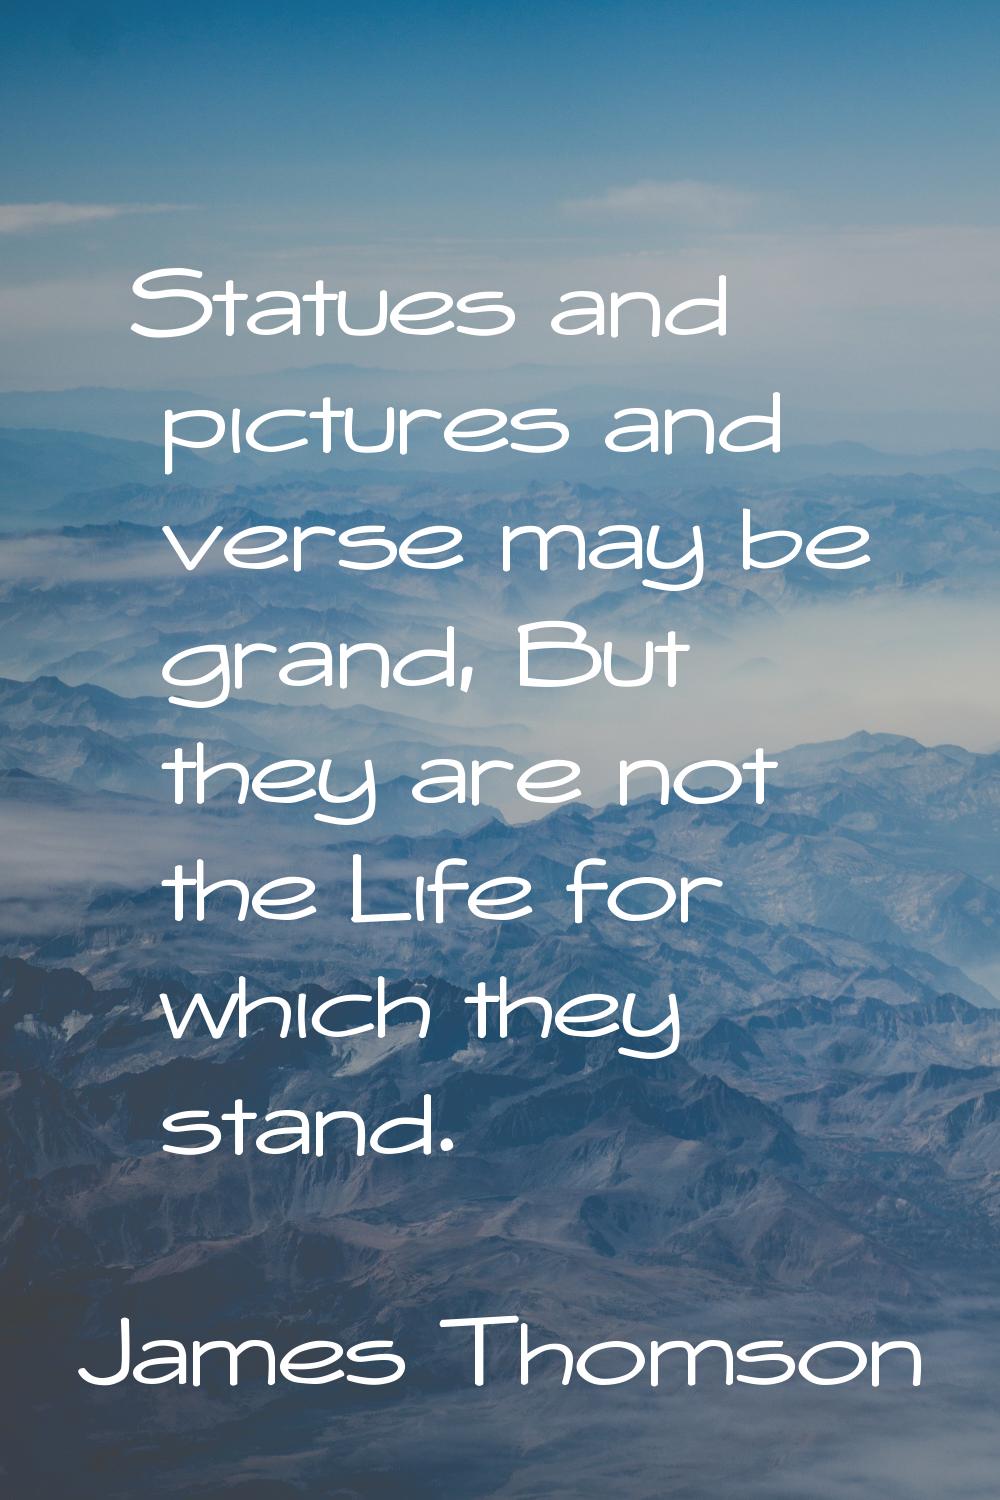 Statues and pictures and verse may be grand, But they are not the Life for which they stand.